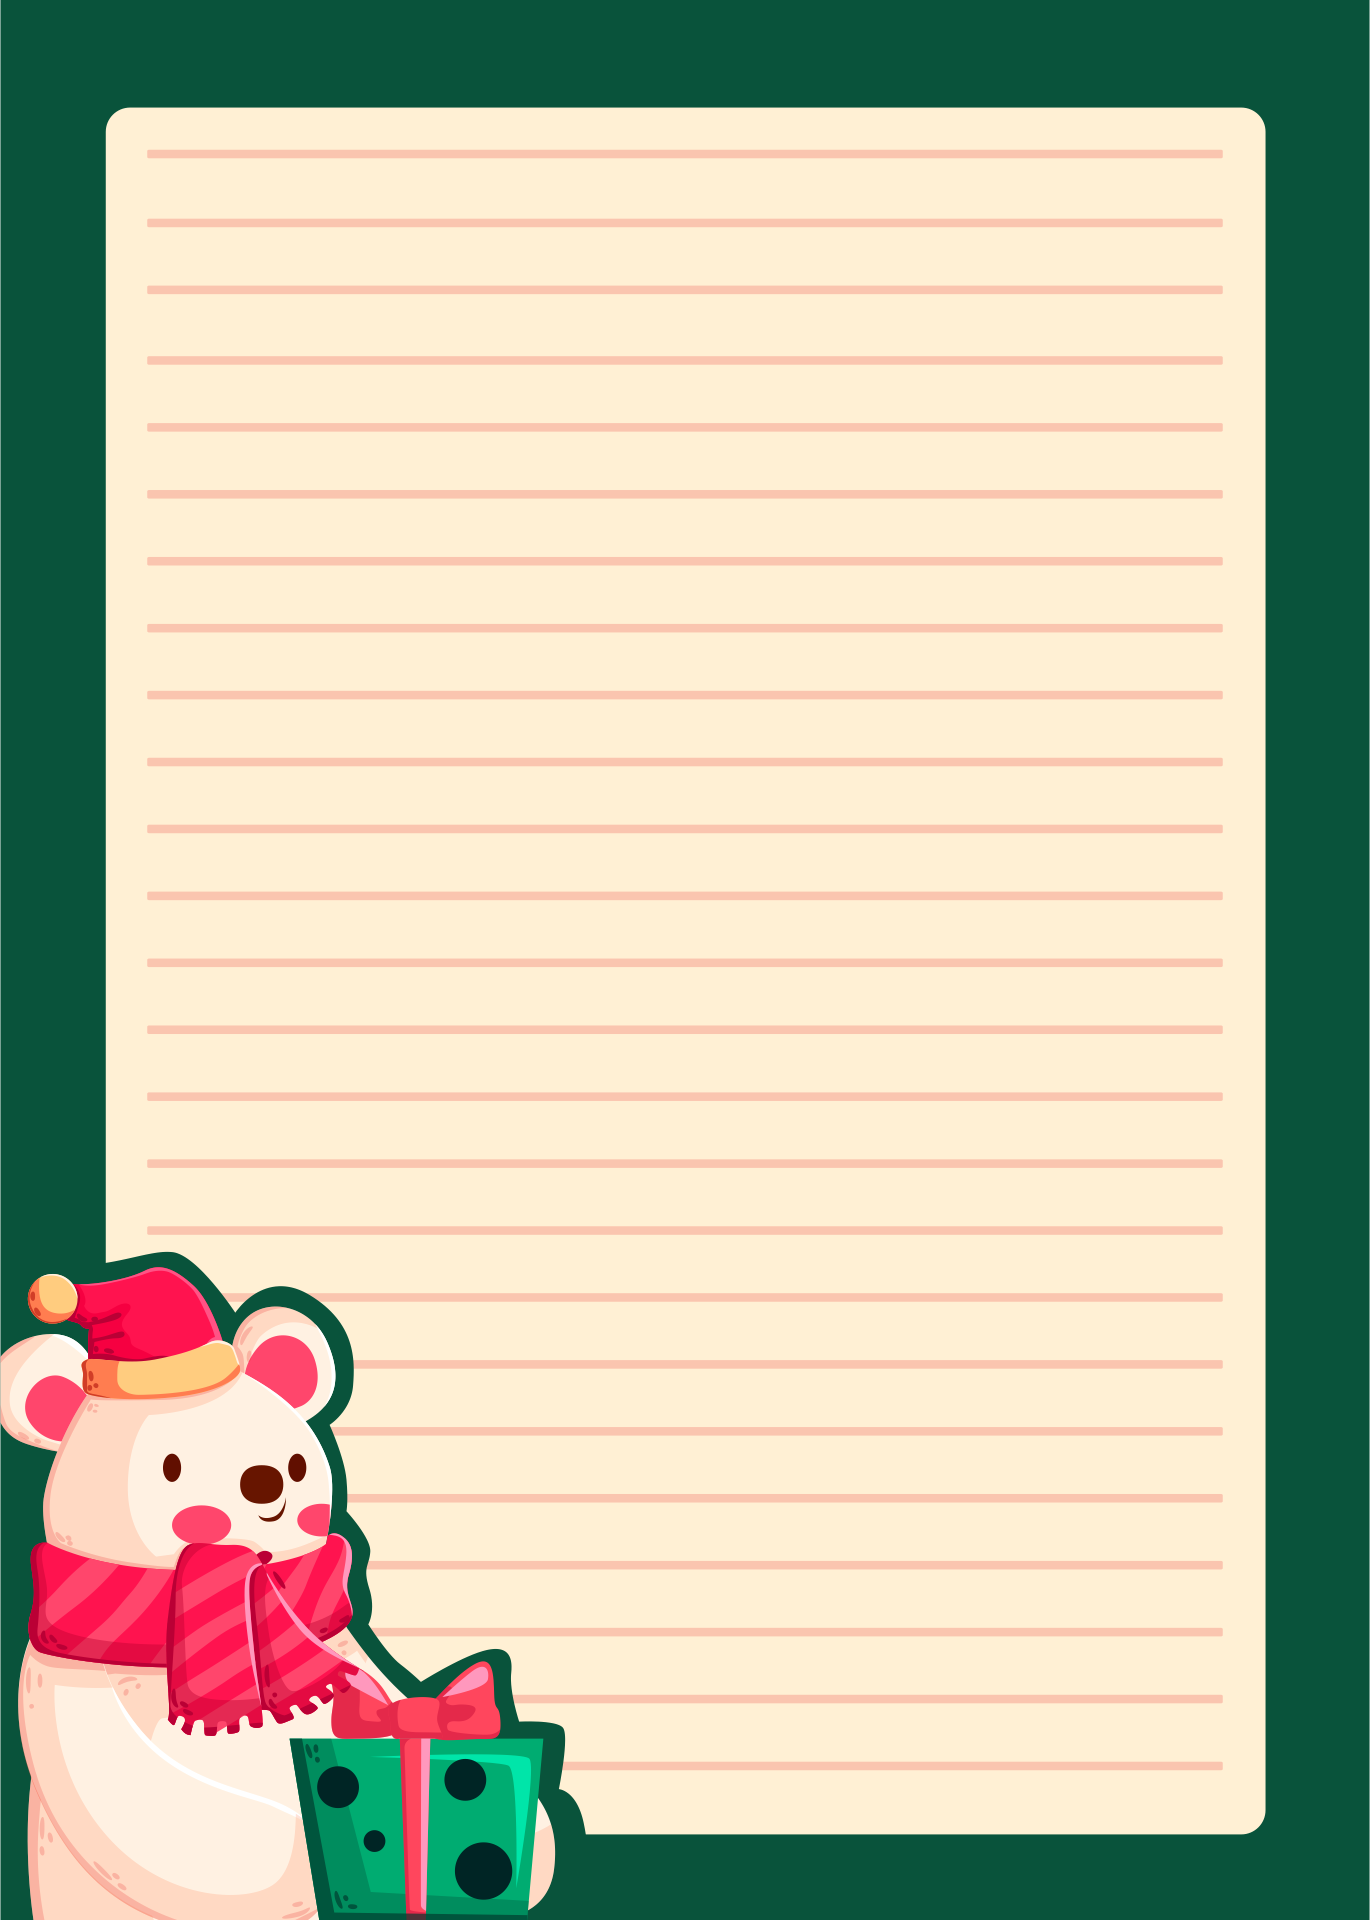 8-best-images-of-printable-christmas-lined-paper-with-borders-printable-christmas-lined